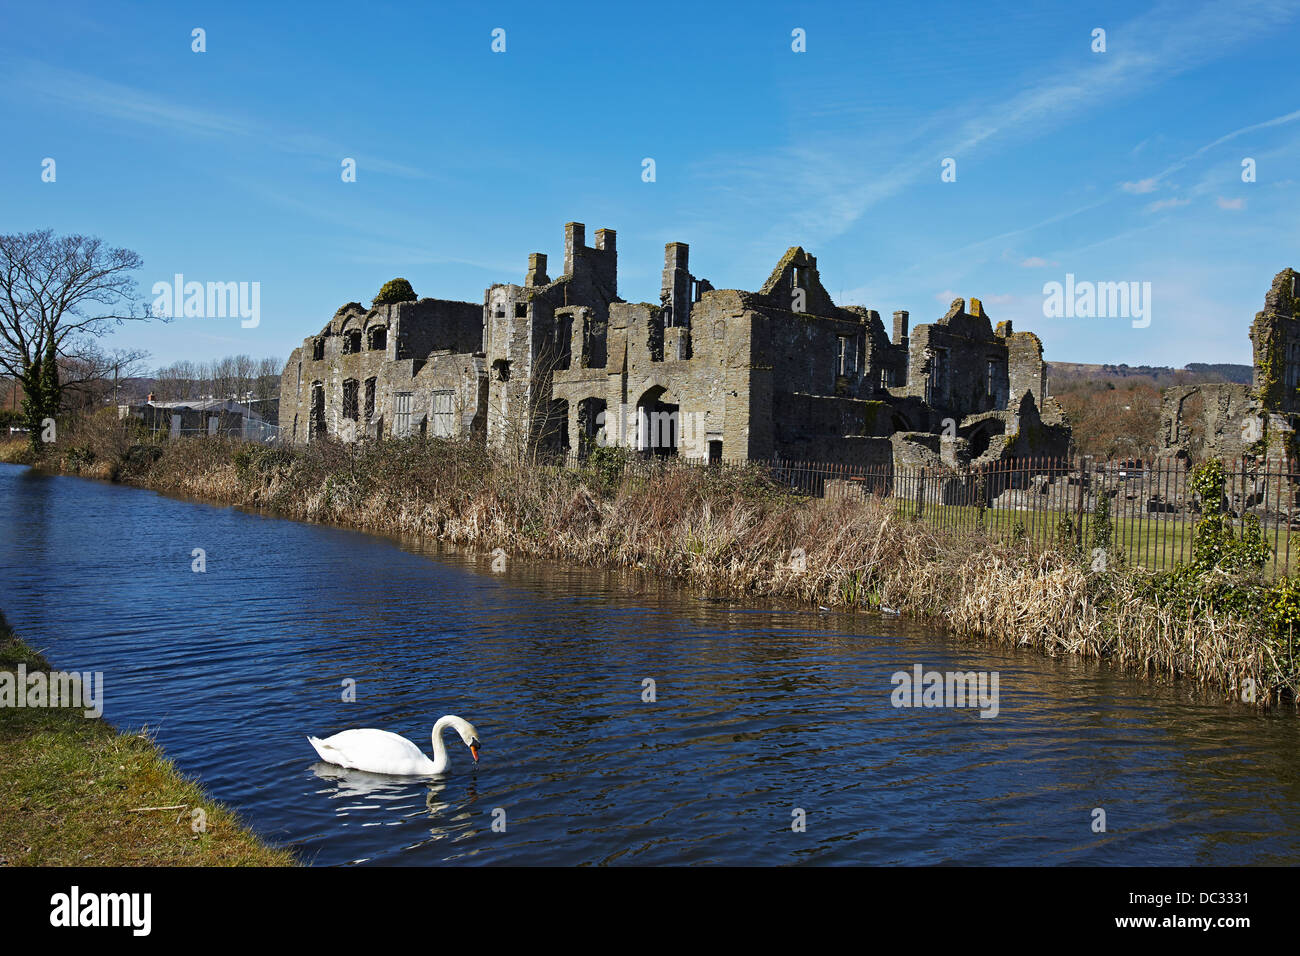 Neath Abbey, Neath, South Wales, UK Banque D'Images